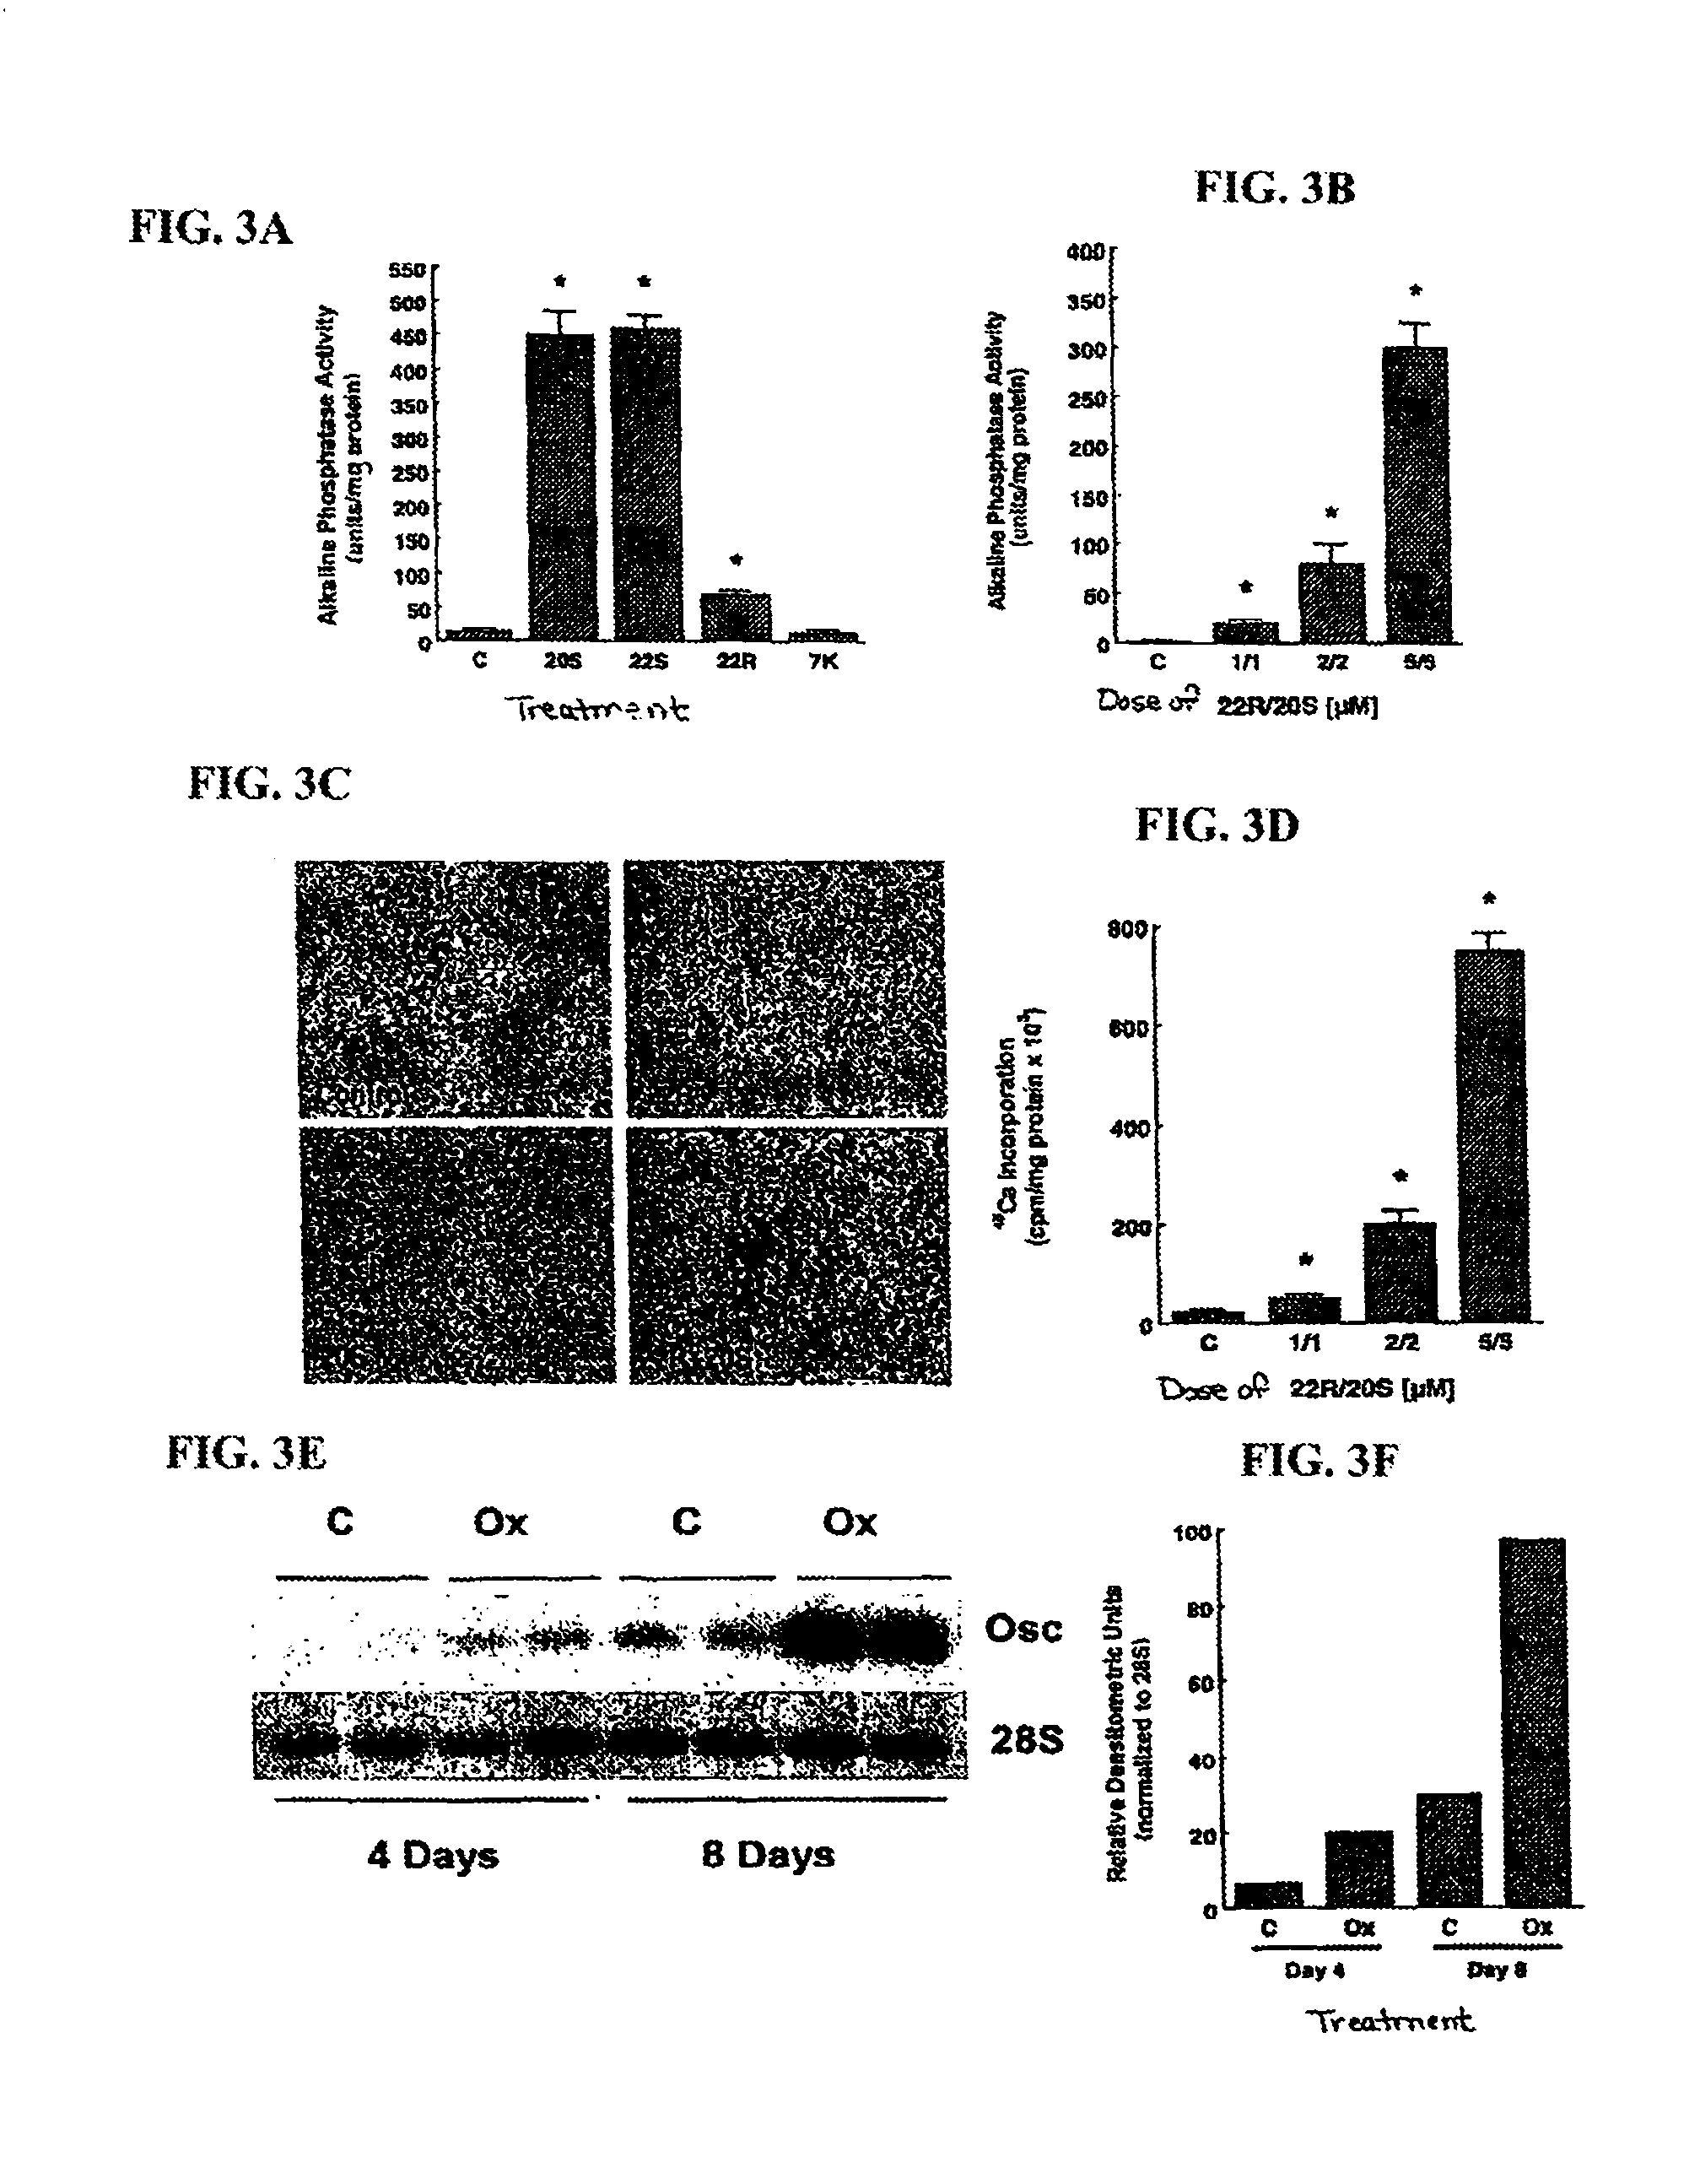 Agents and methods for enhancing bone formation by oxysterols in combination with bone morphogenic proteins